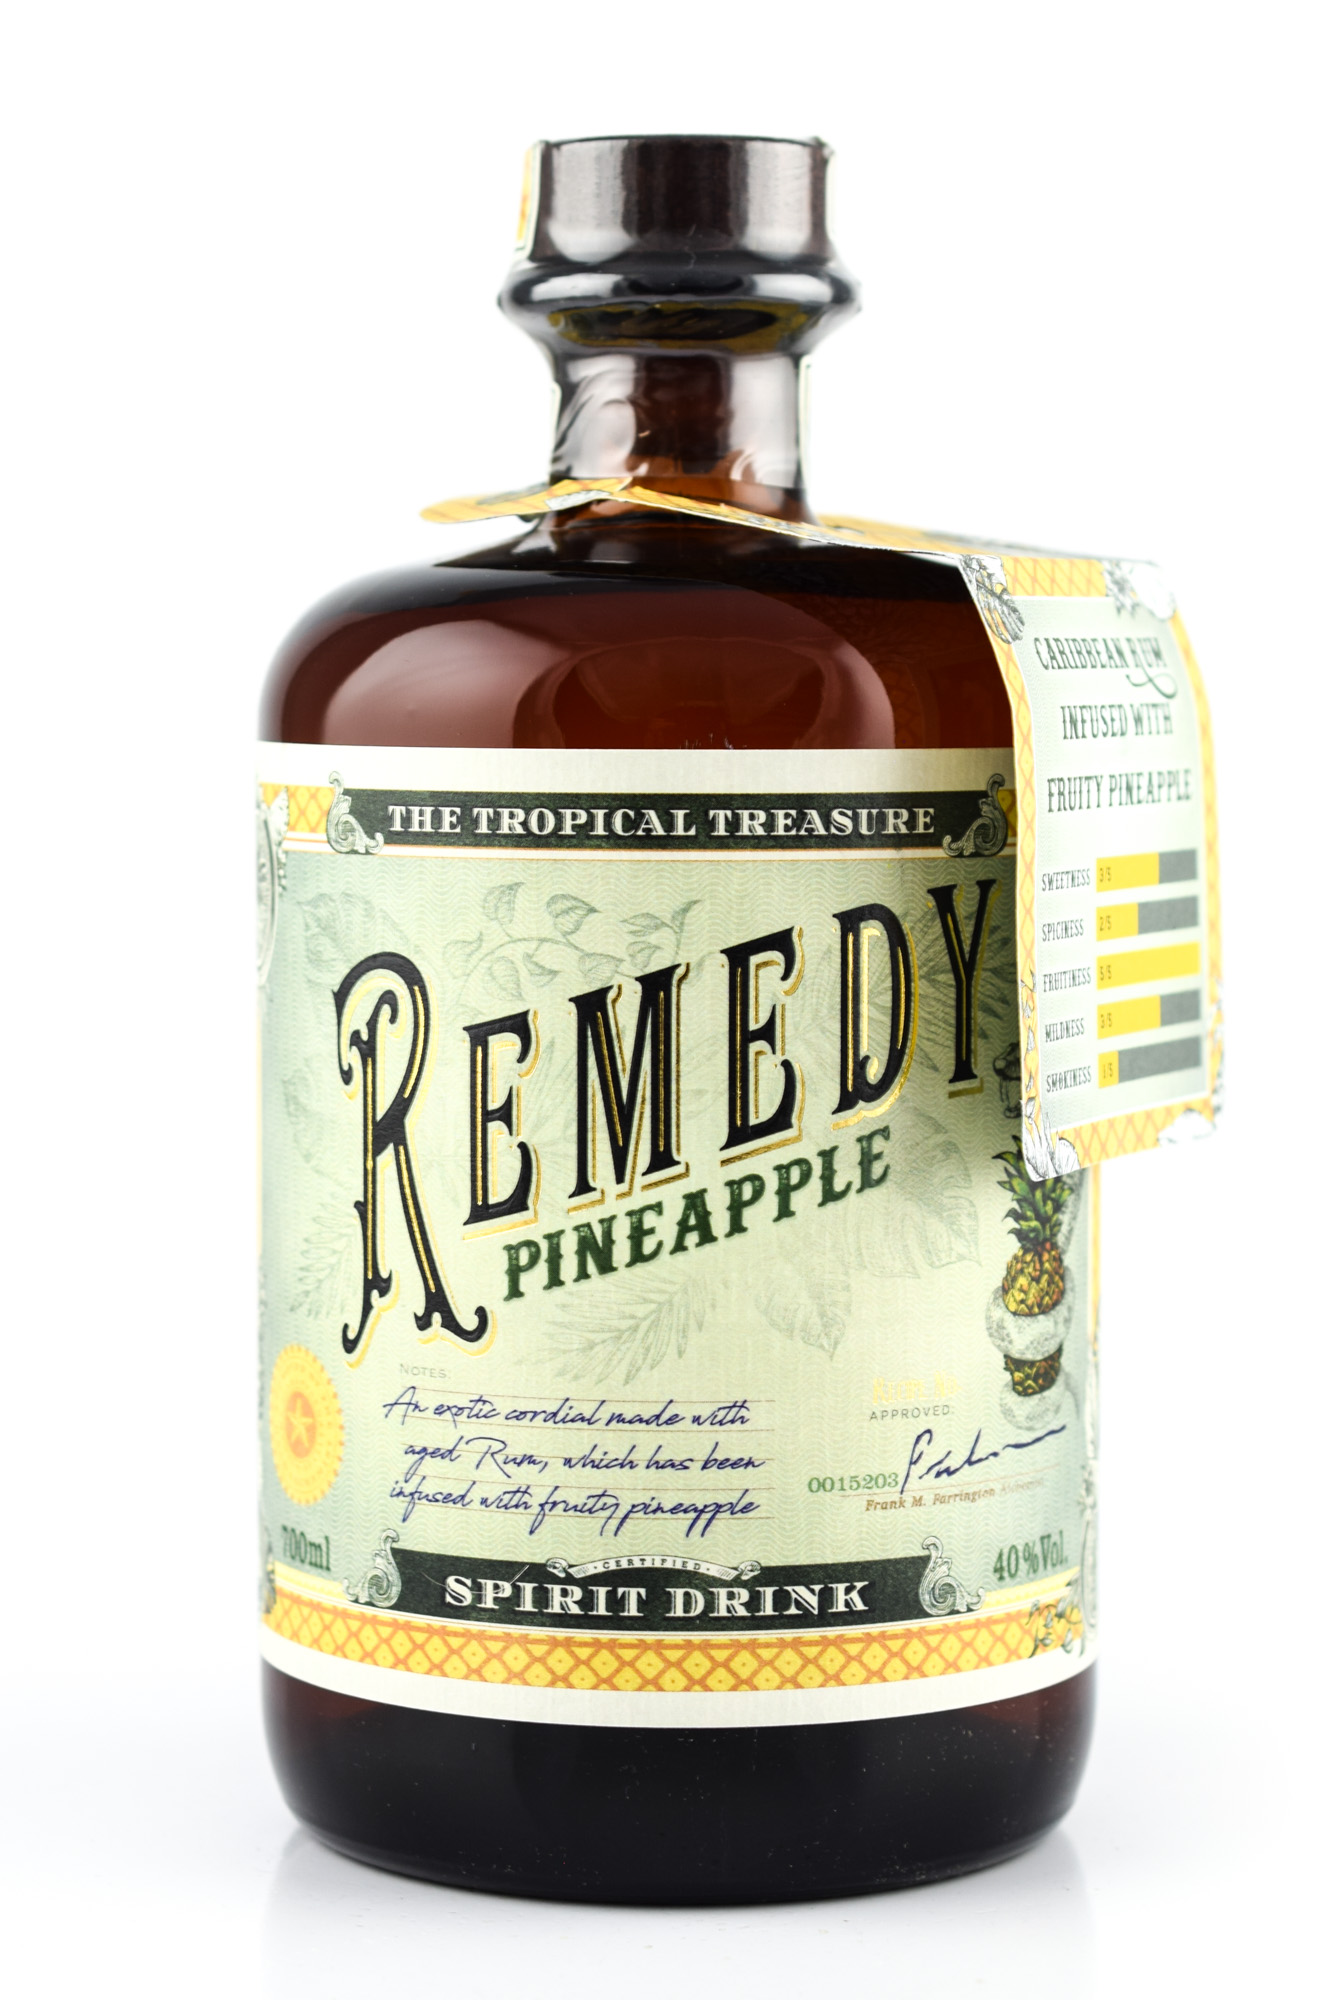 of at explore now! Pineapple >> Malts Home | Home Malts of Remedy